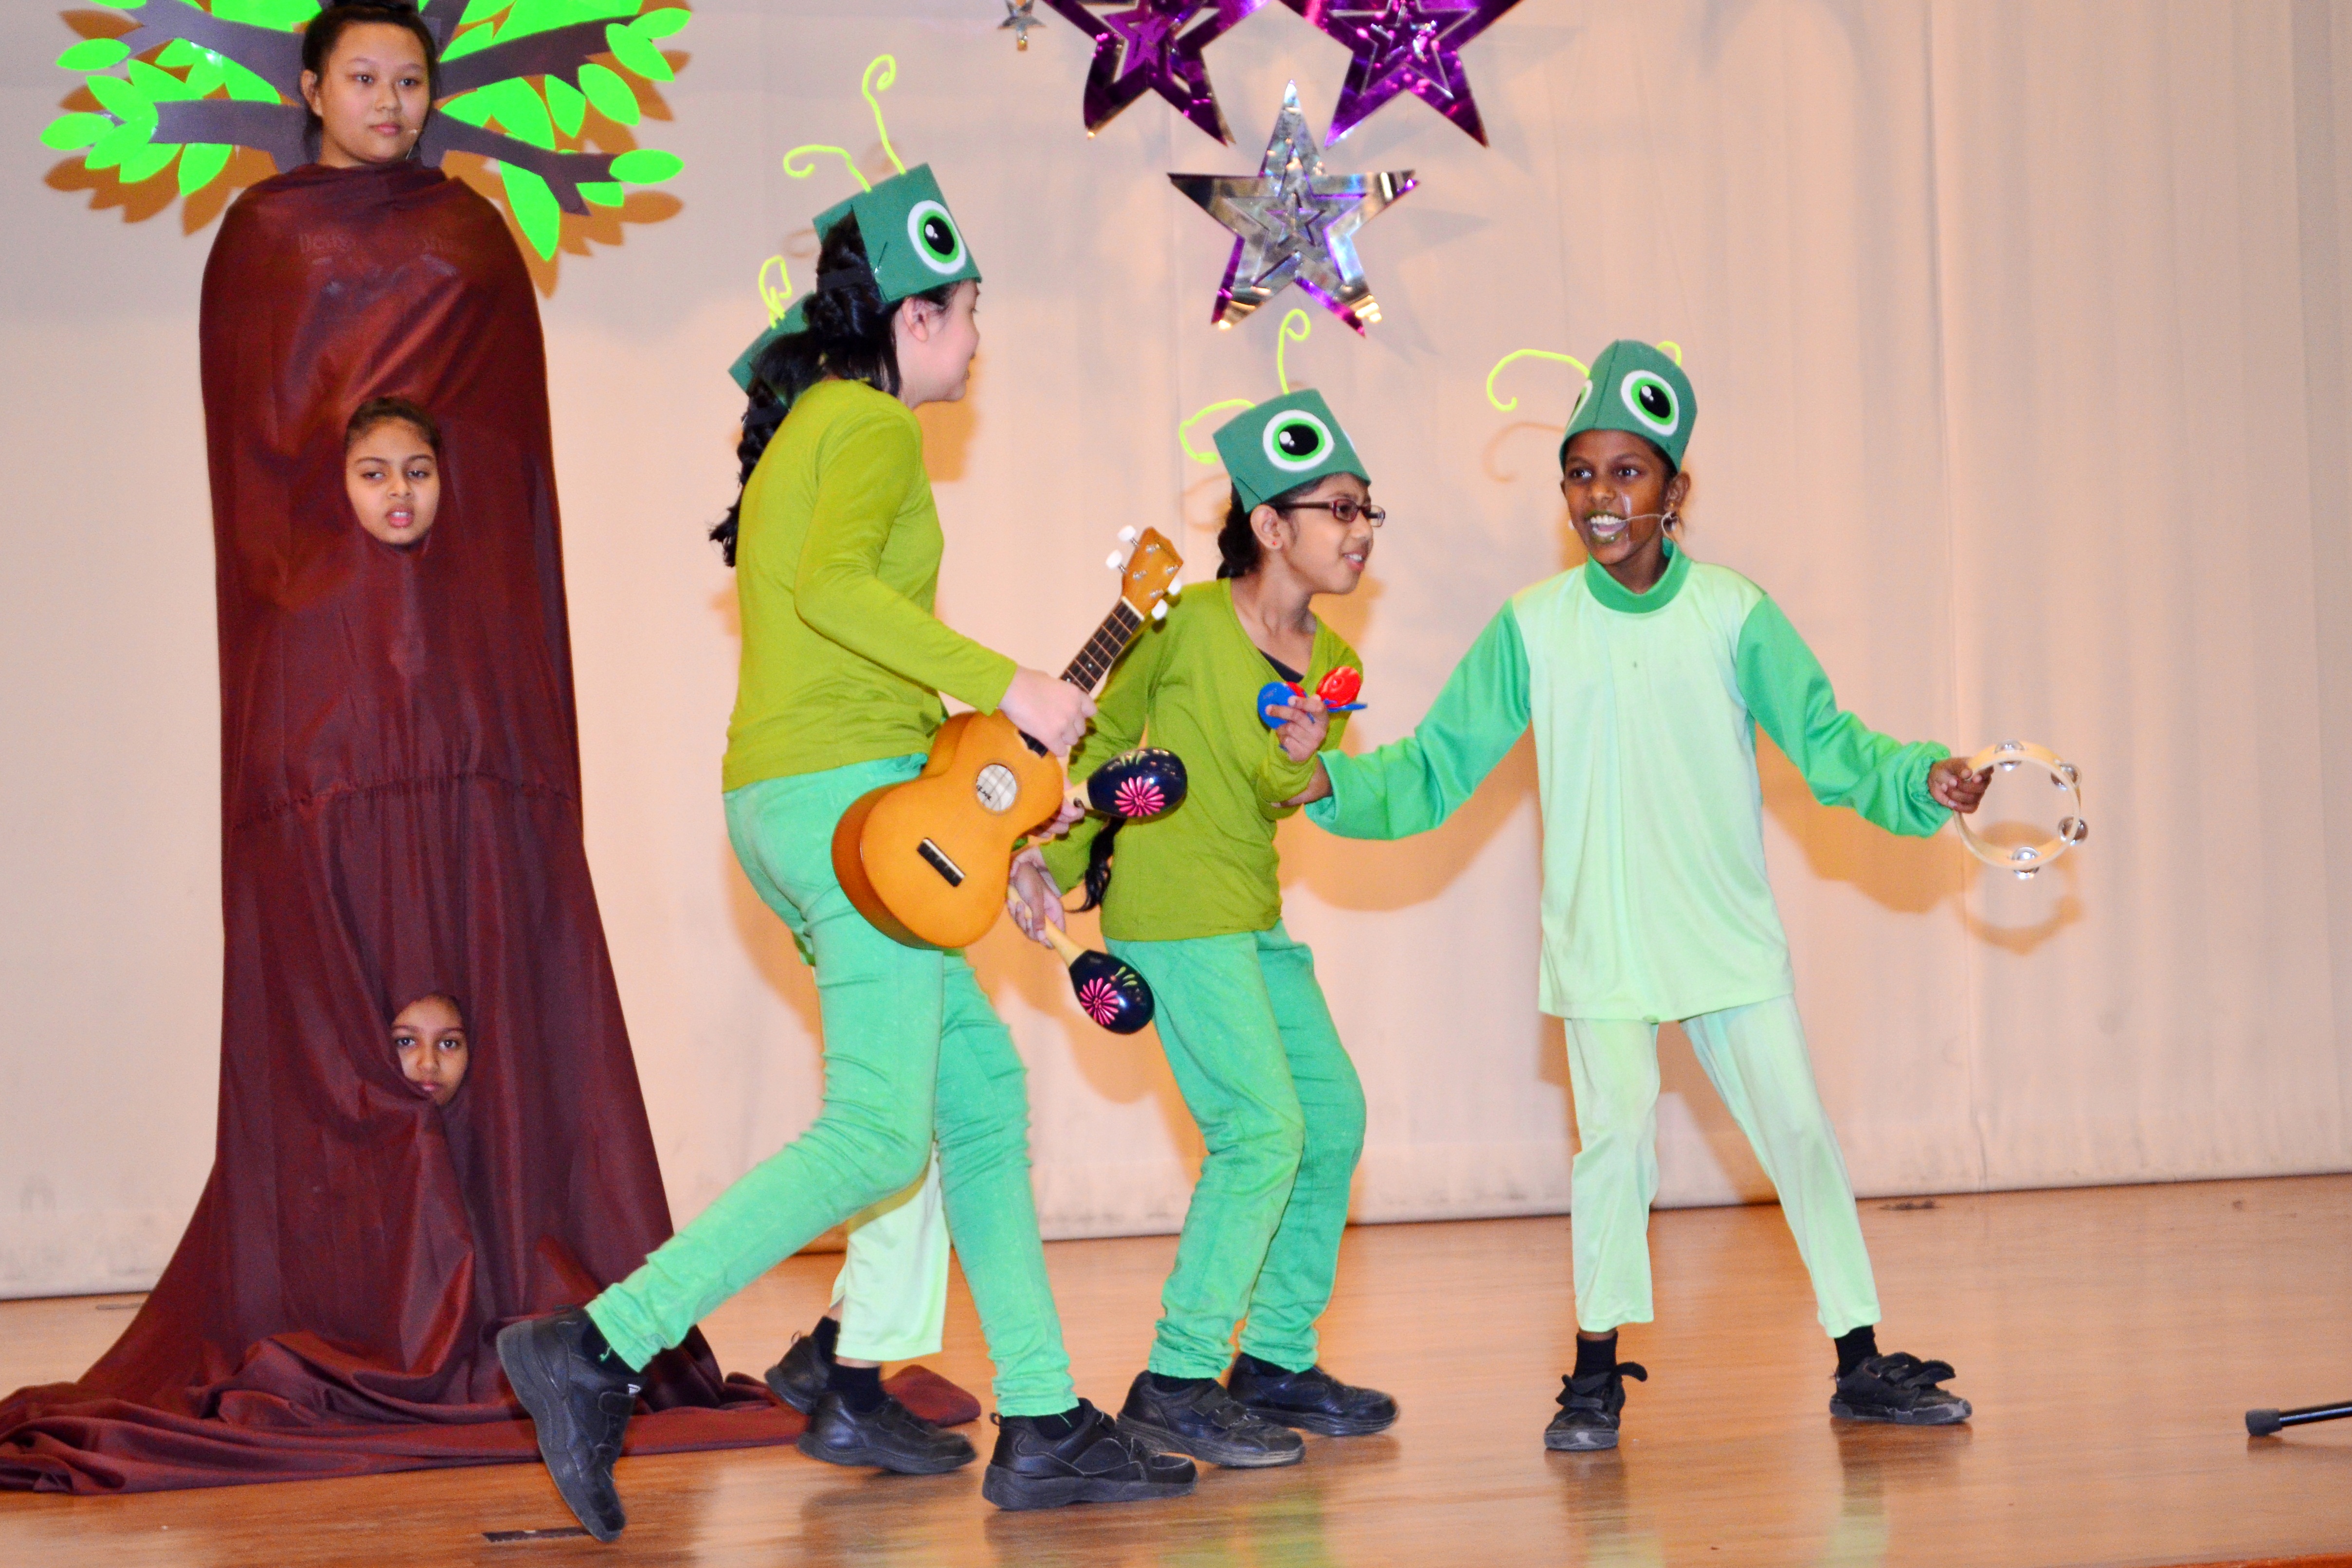 Students with the aptitude for acting can take it one step further by joining the school’s Drama Club.